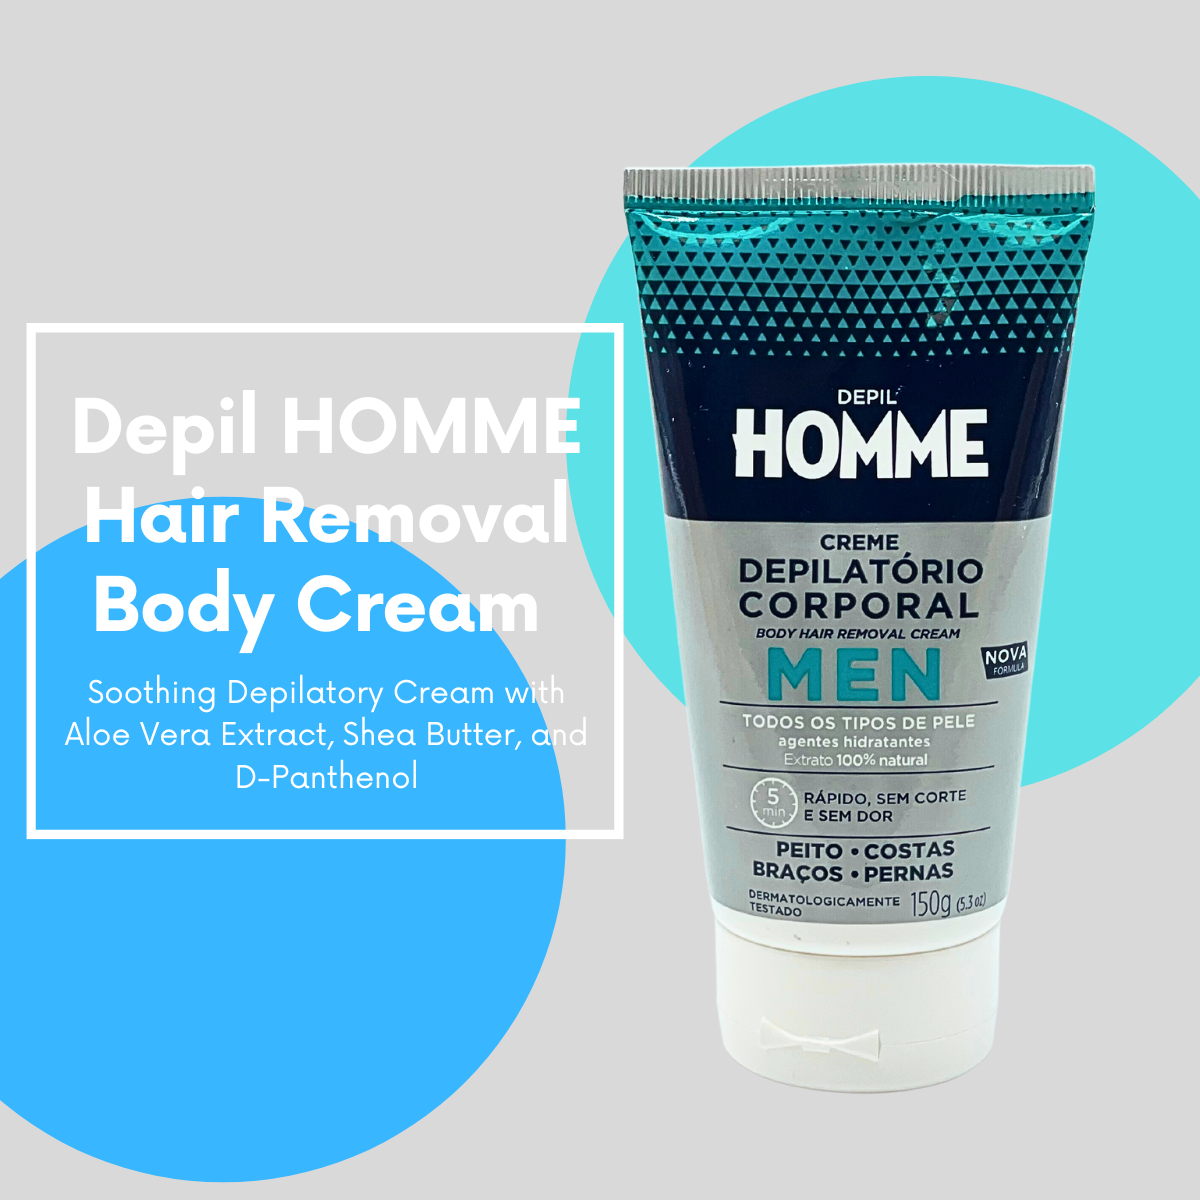 Hair removal cream  for men to remove body hair quickly